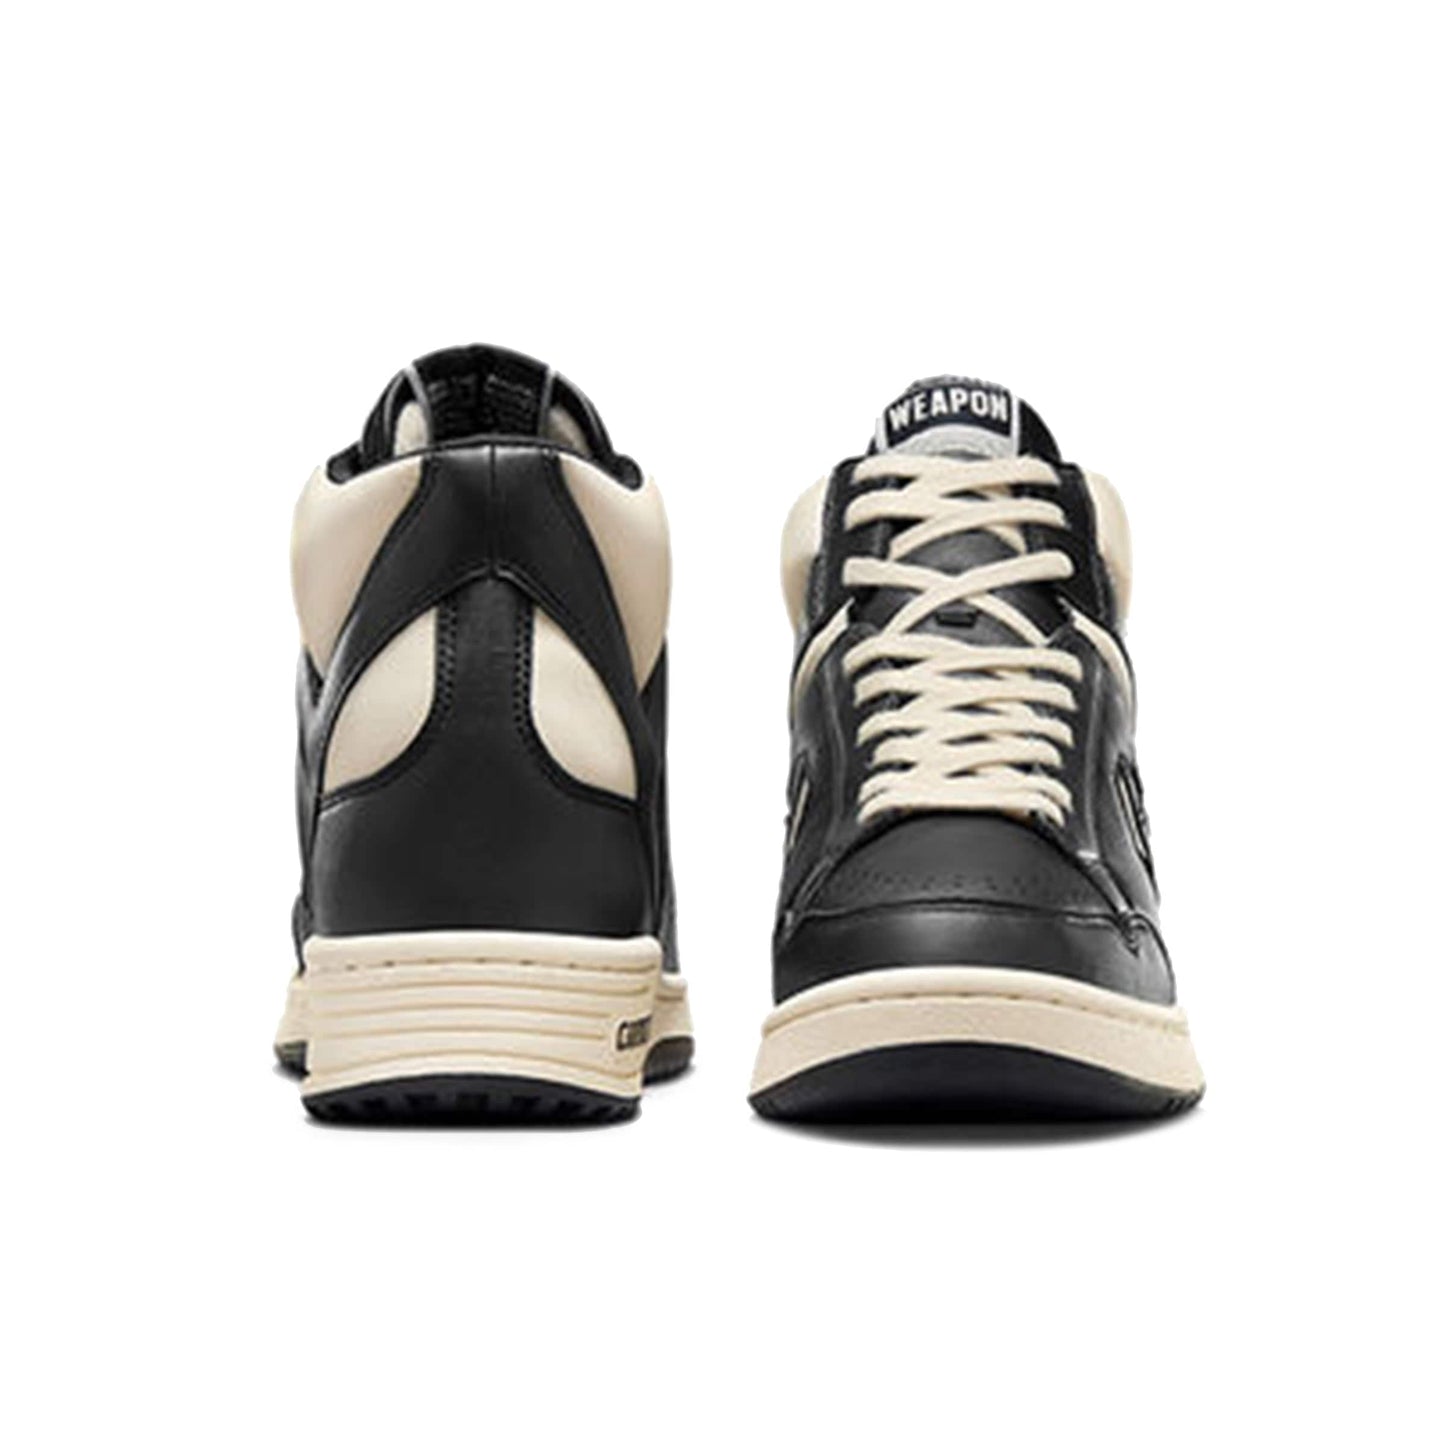 Converse Sneakers WEAPON MID